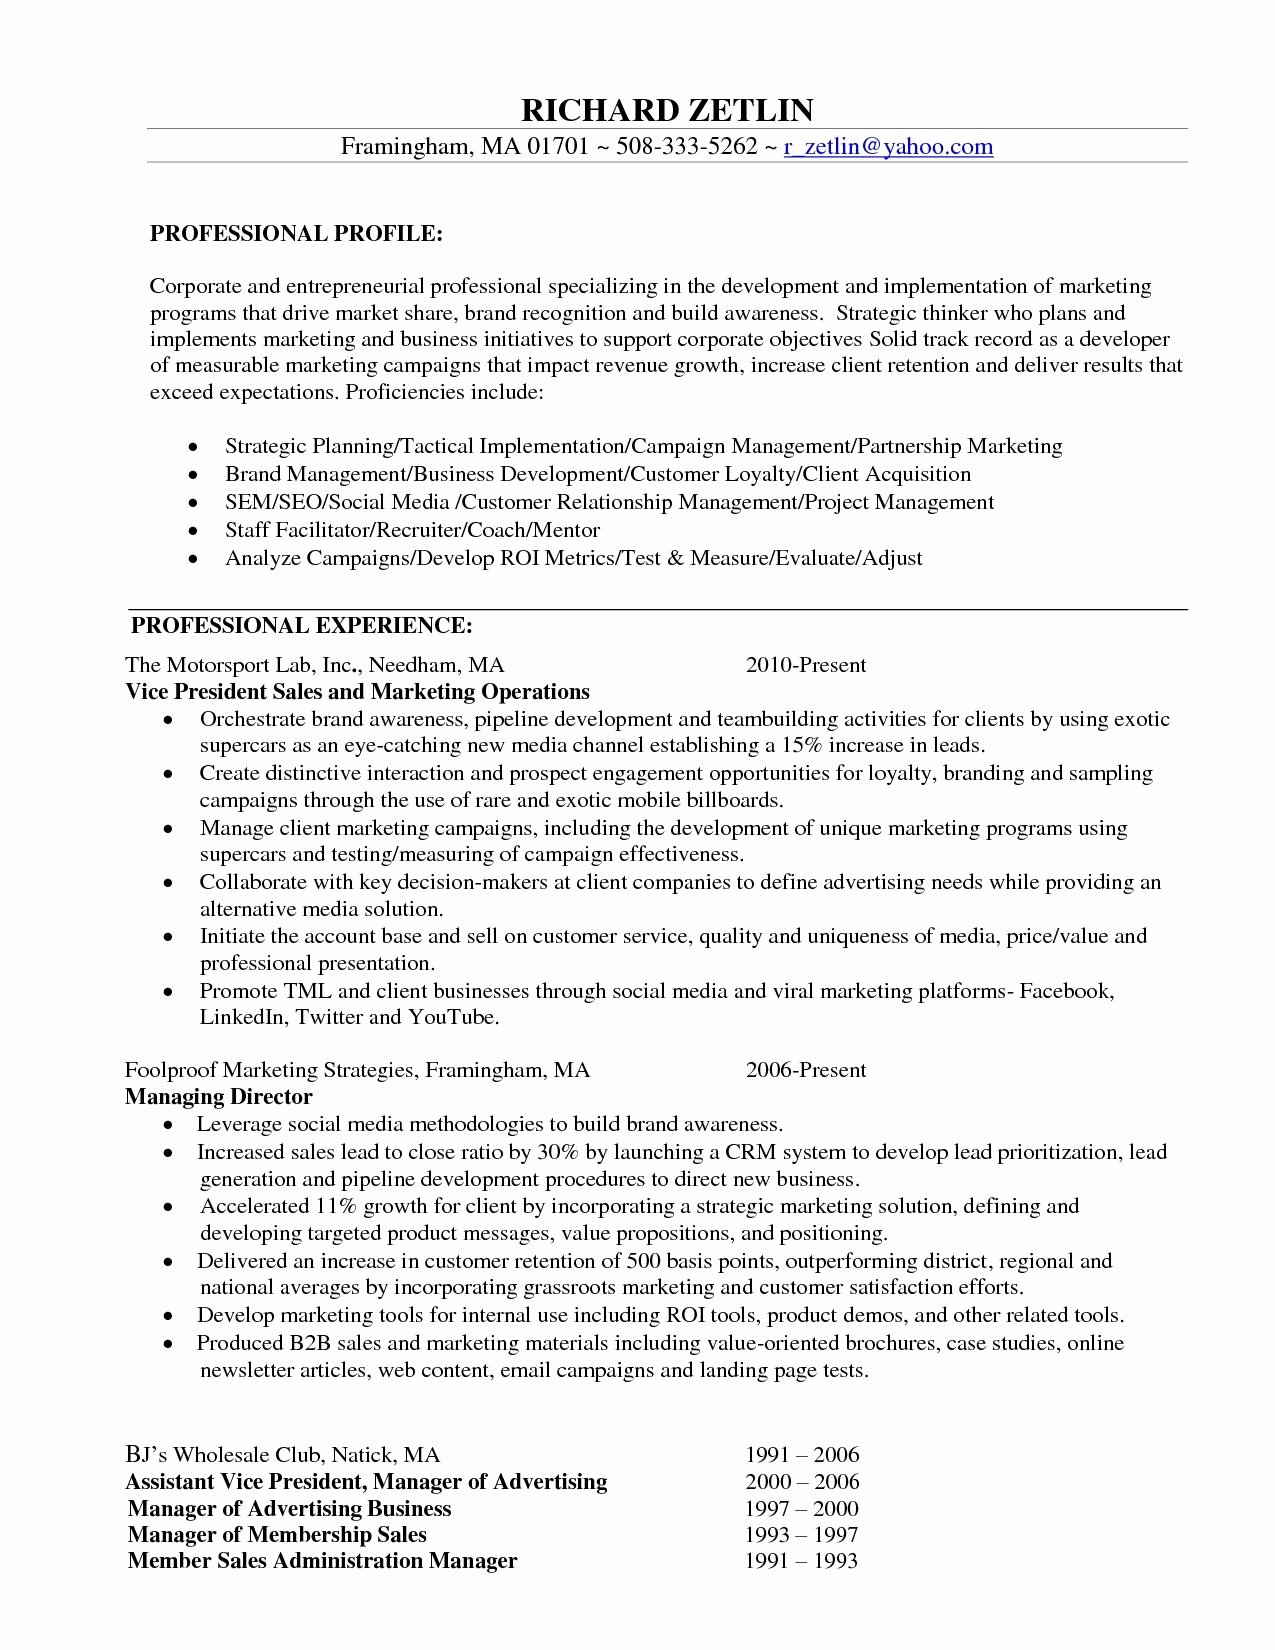 Ma Resume Objective Medical assistant Resume Objective